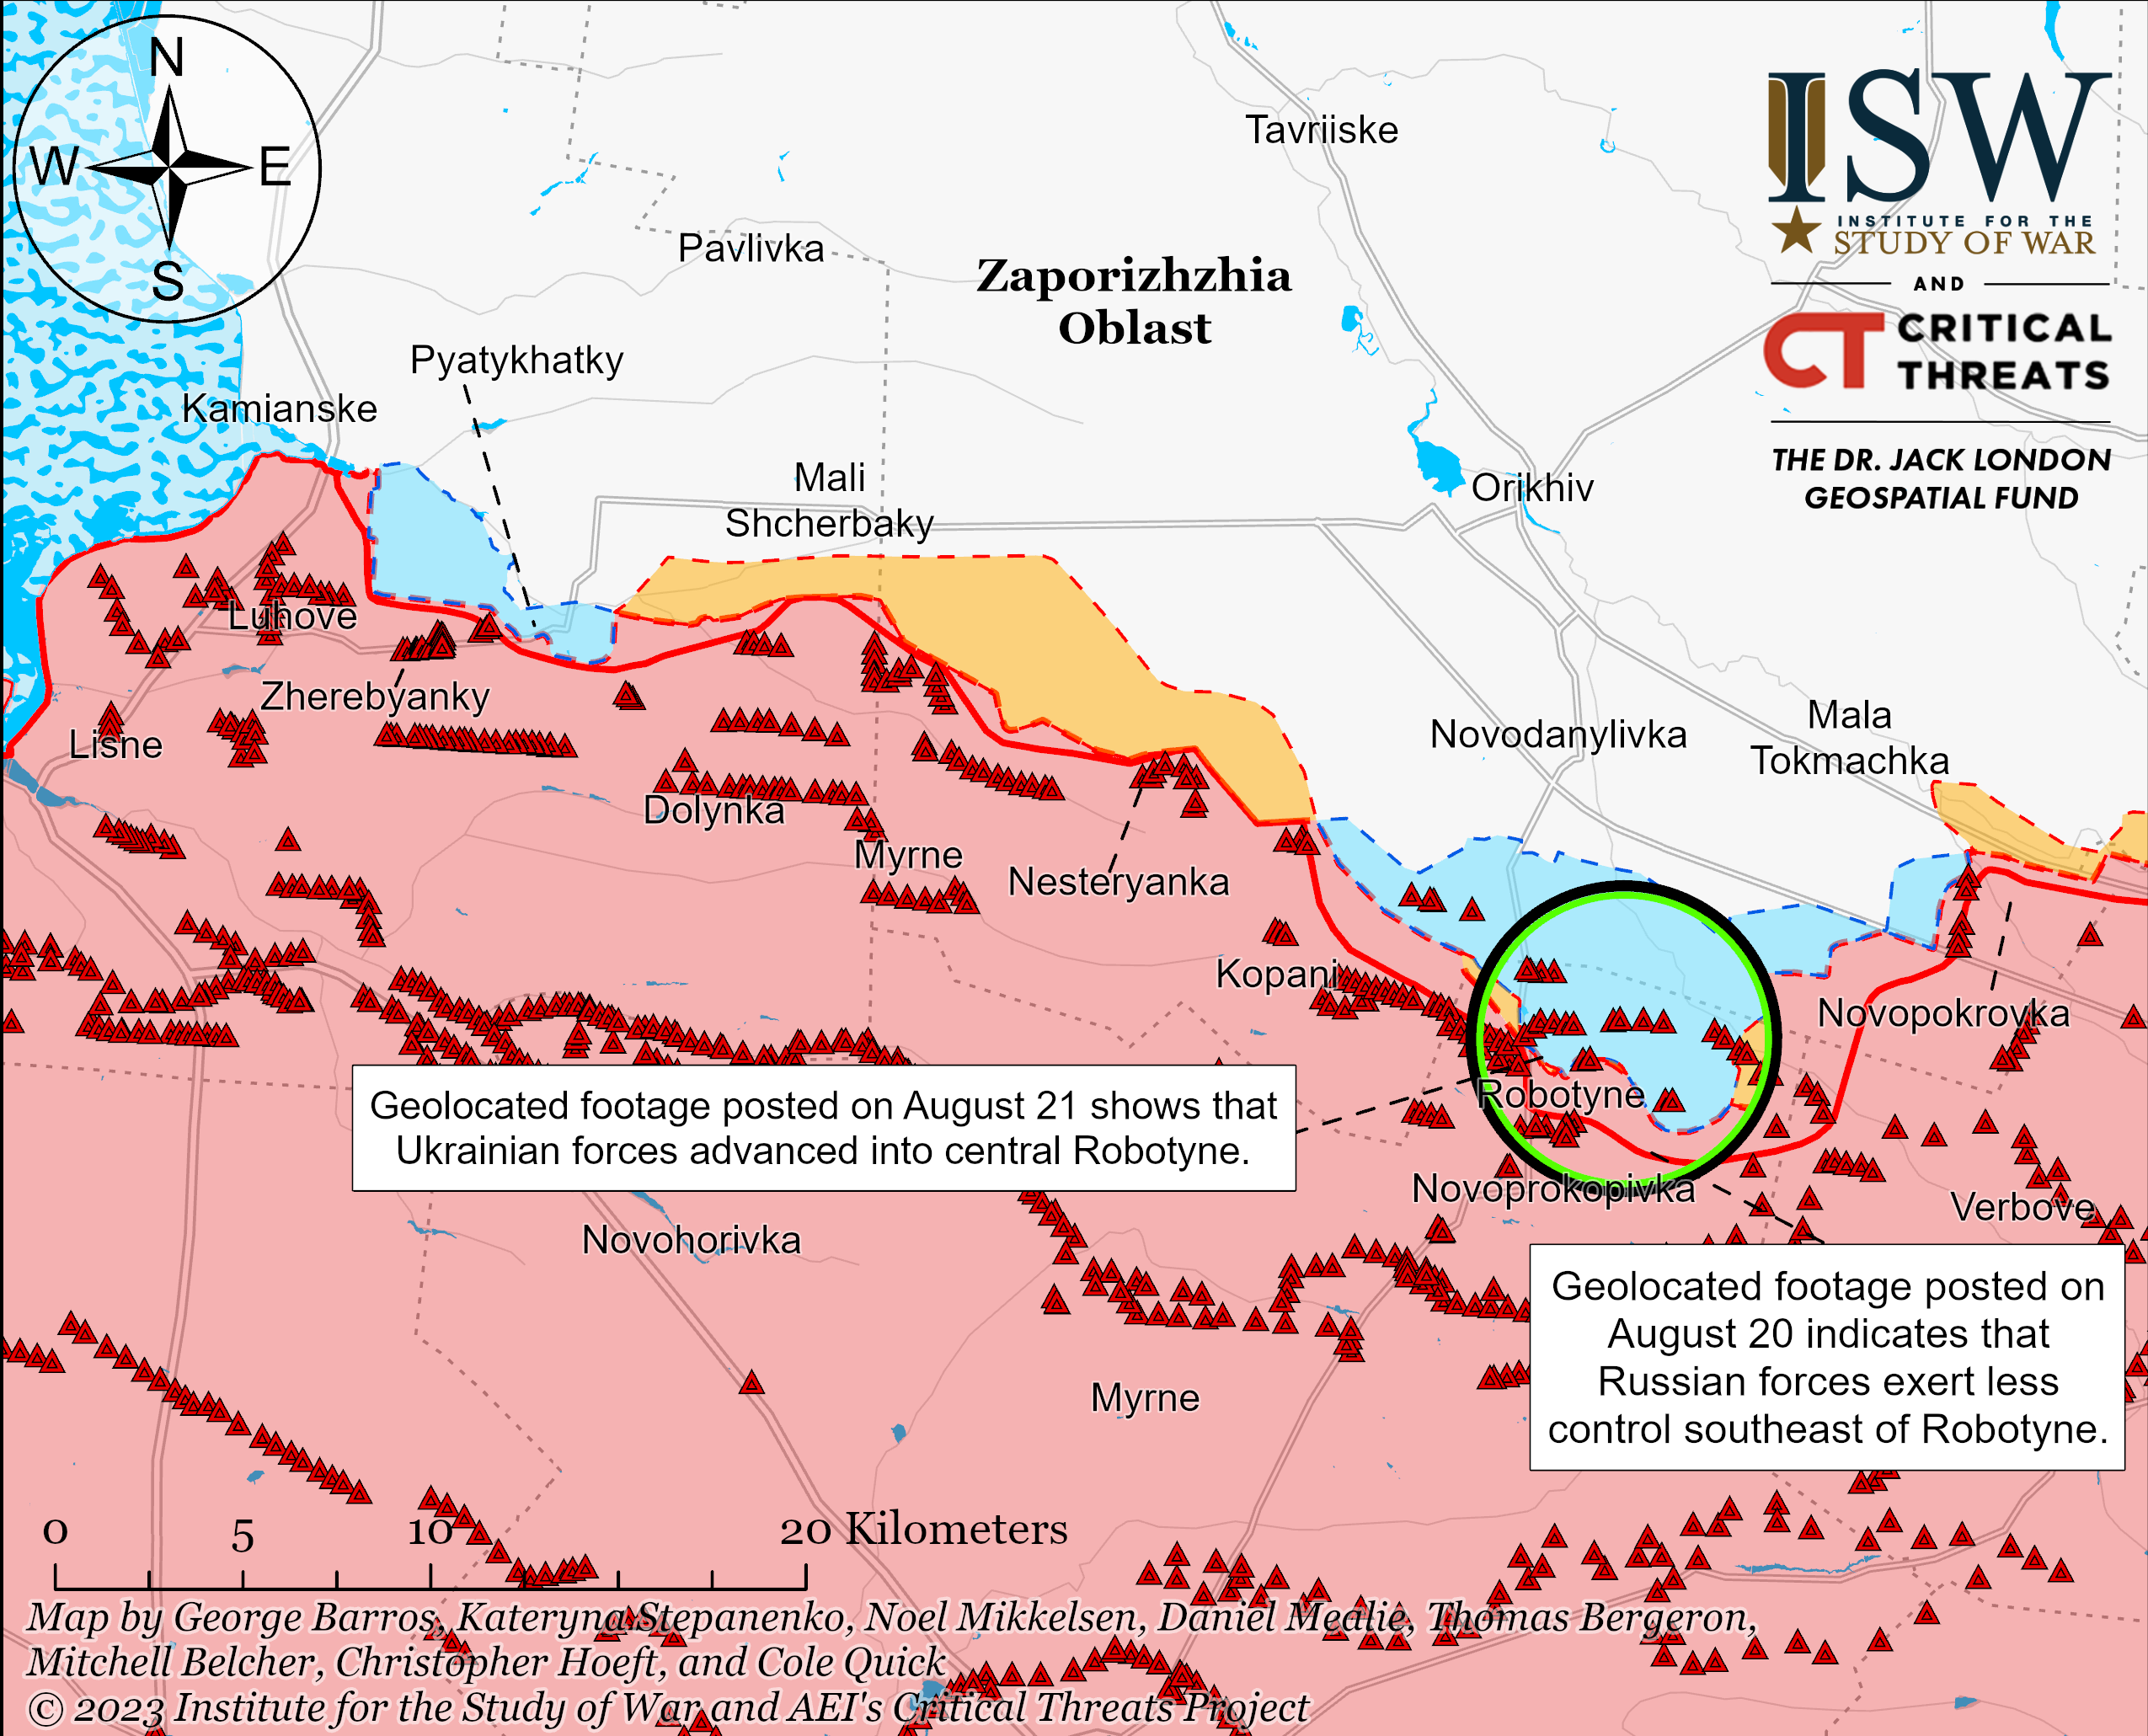 ISW: Ukrainian forces make tactically significant advances near Robotyne - Euromaidan Press